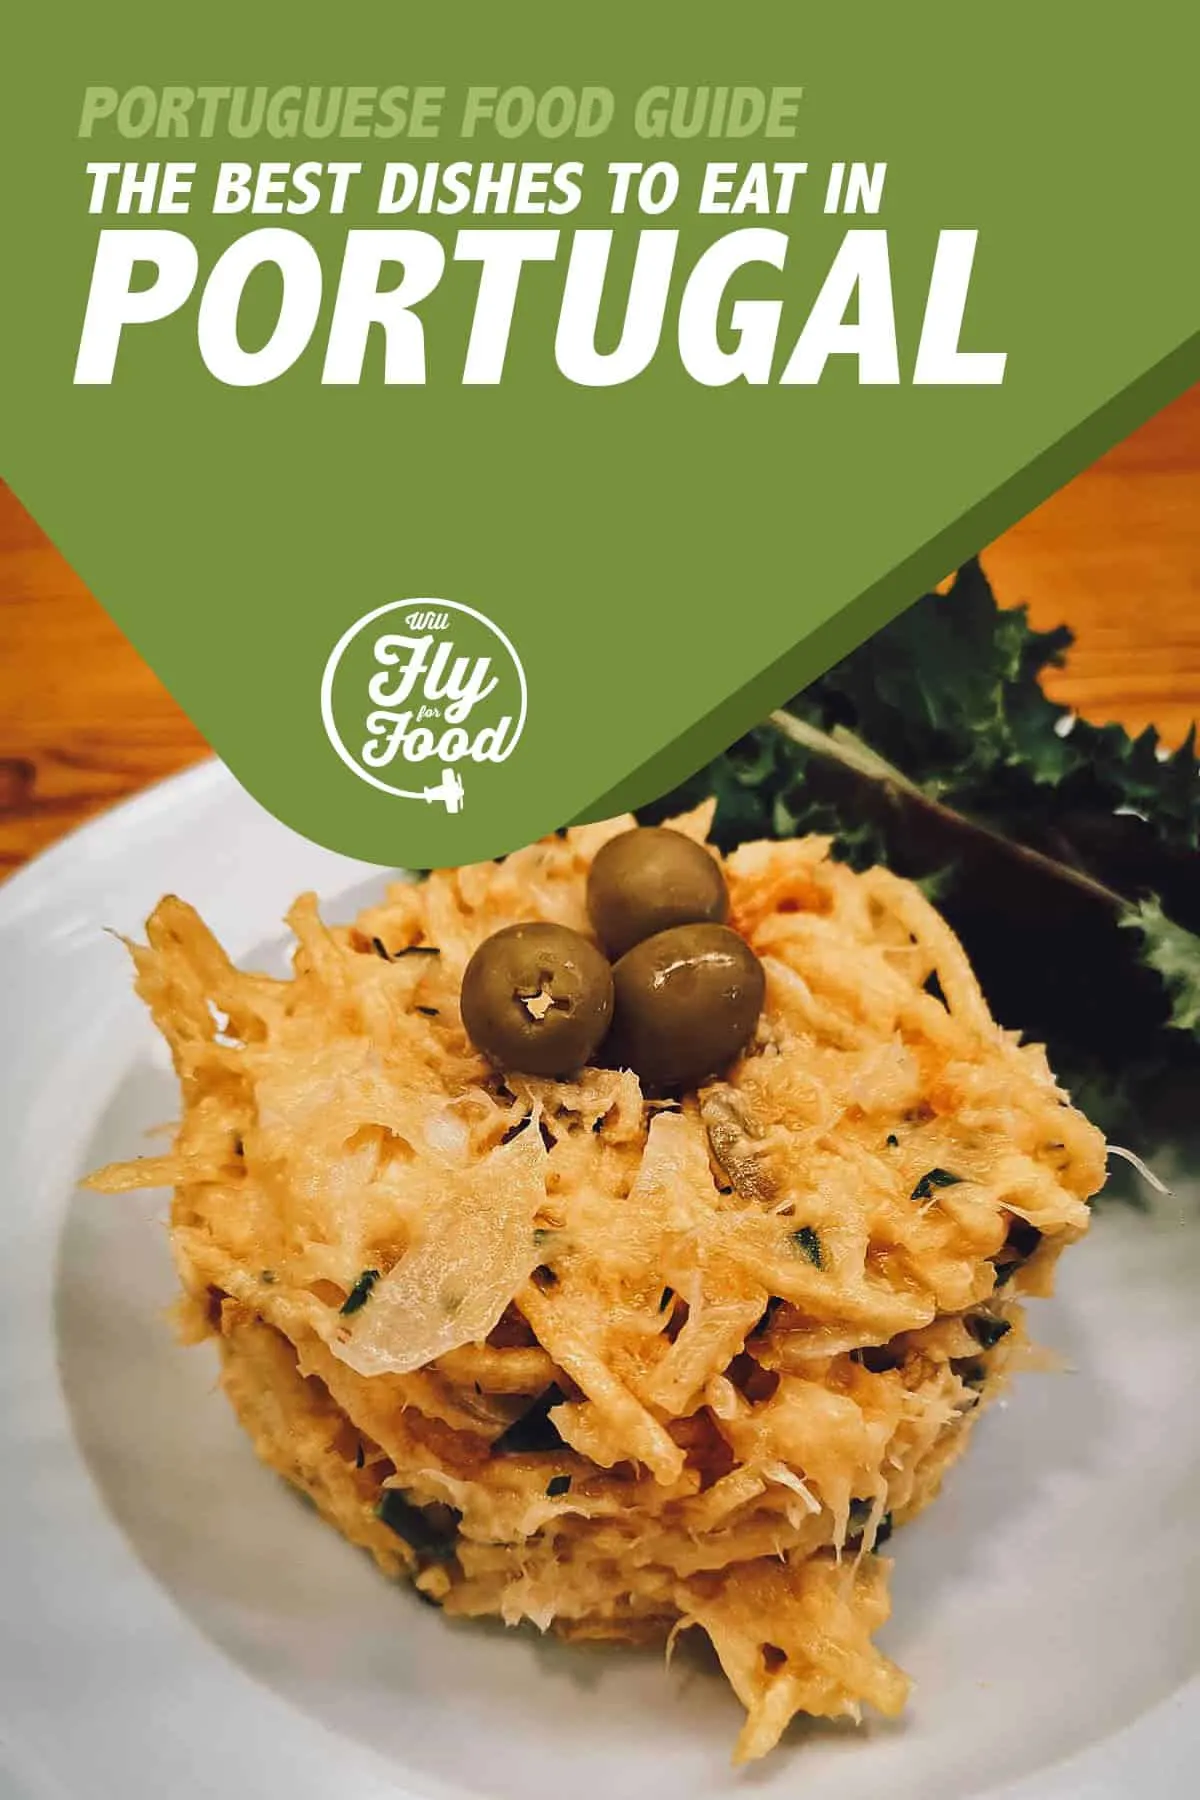 portuguese food near me that delivers